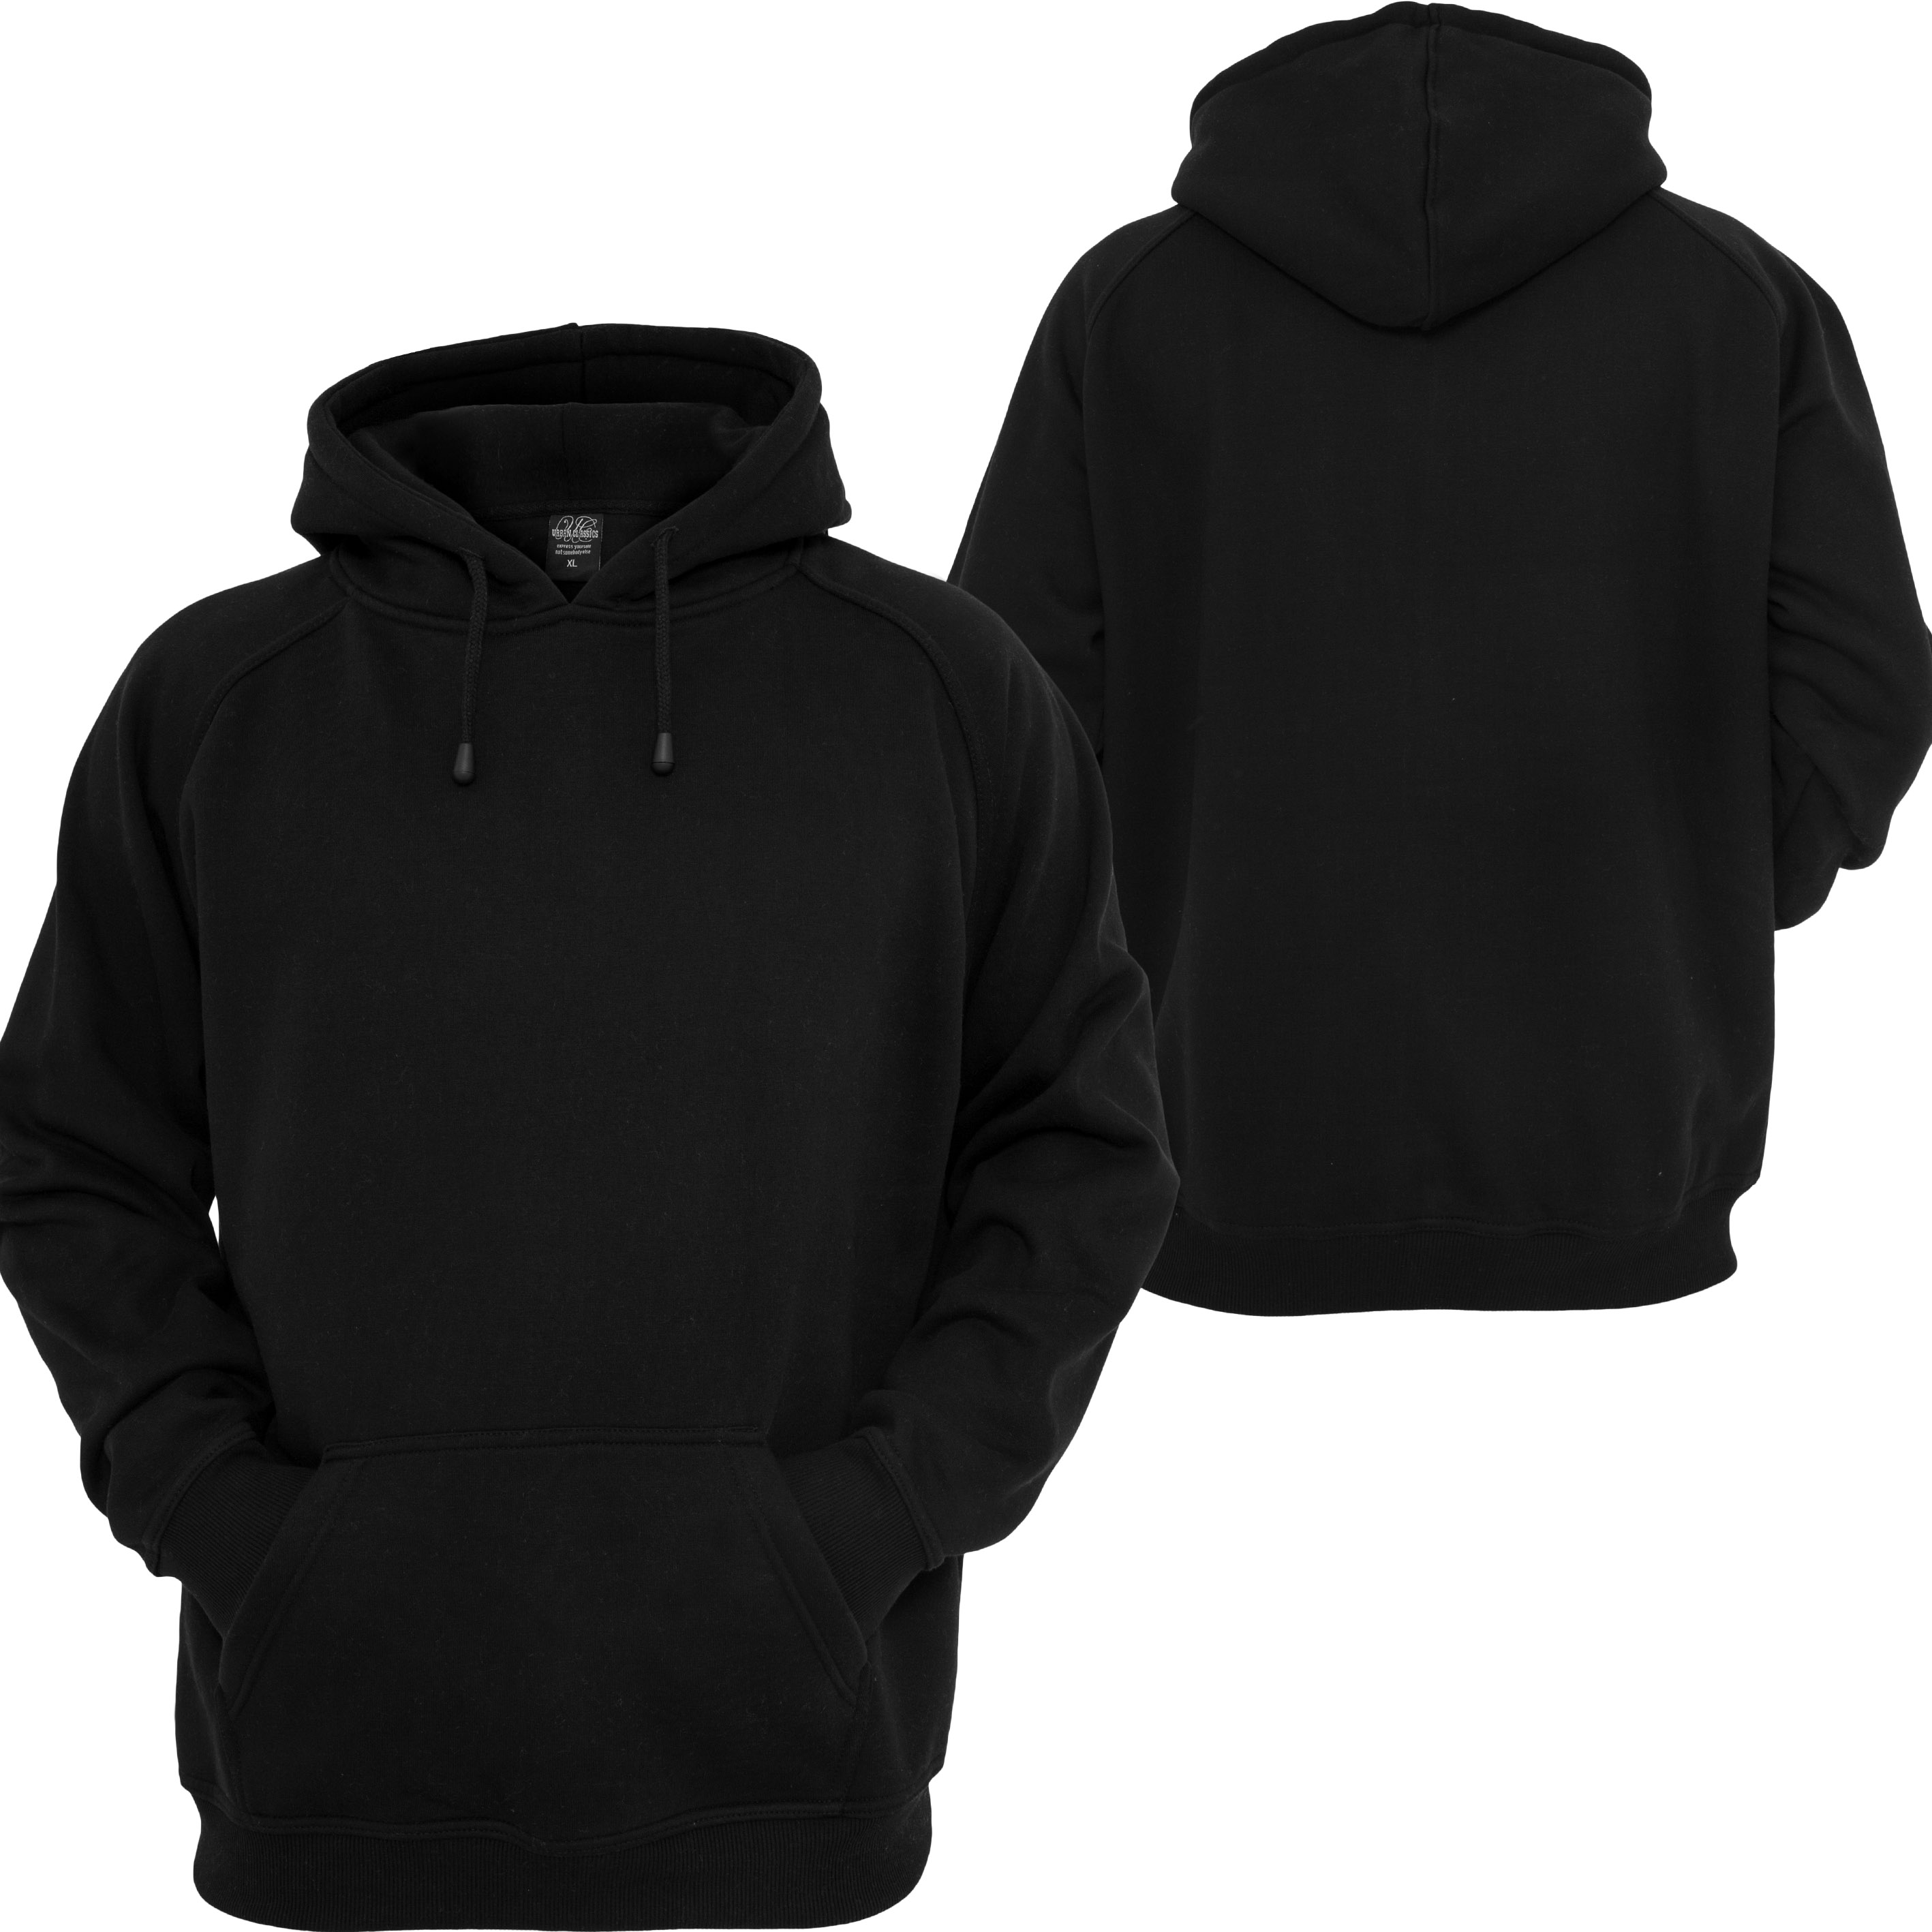 hoodie-front-and-back-template